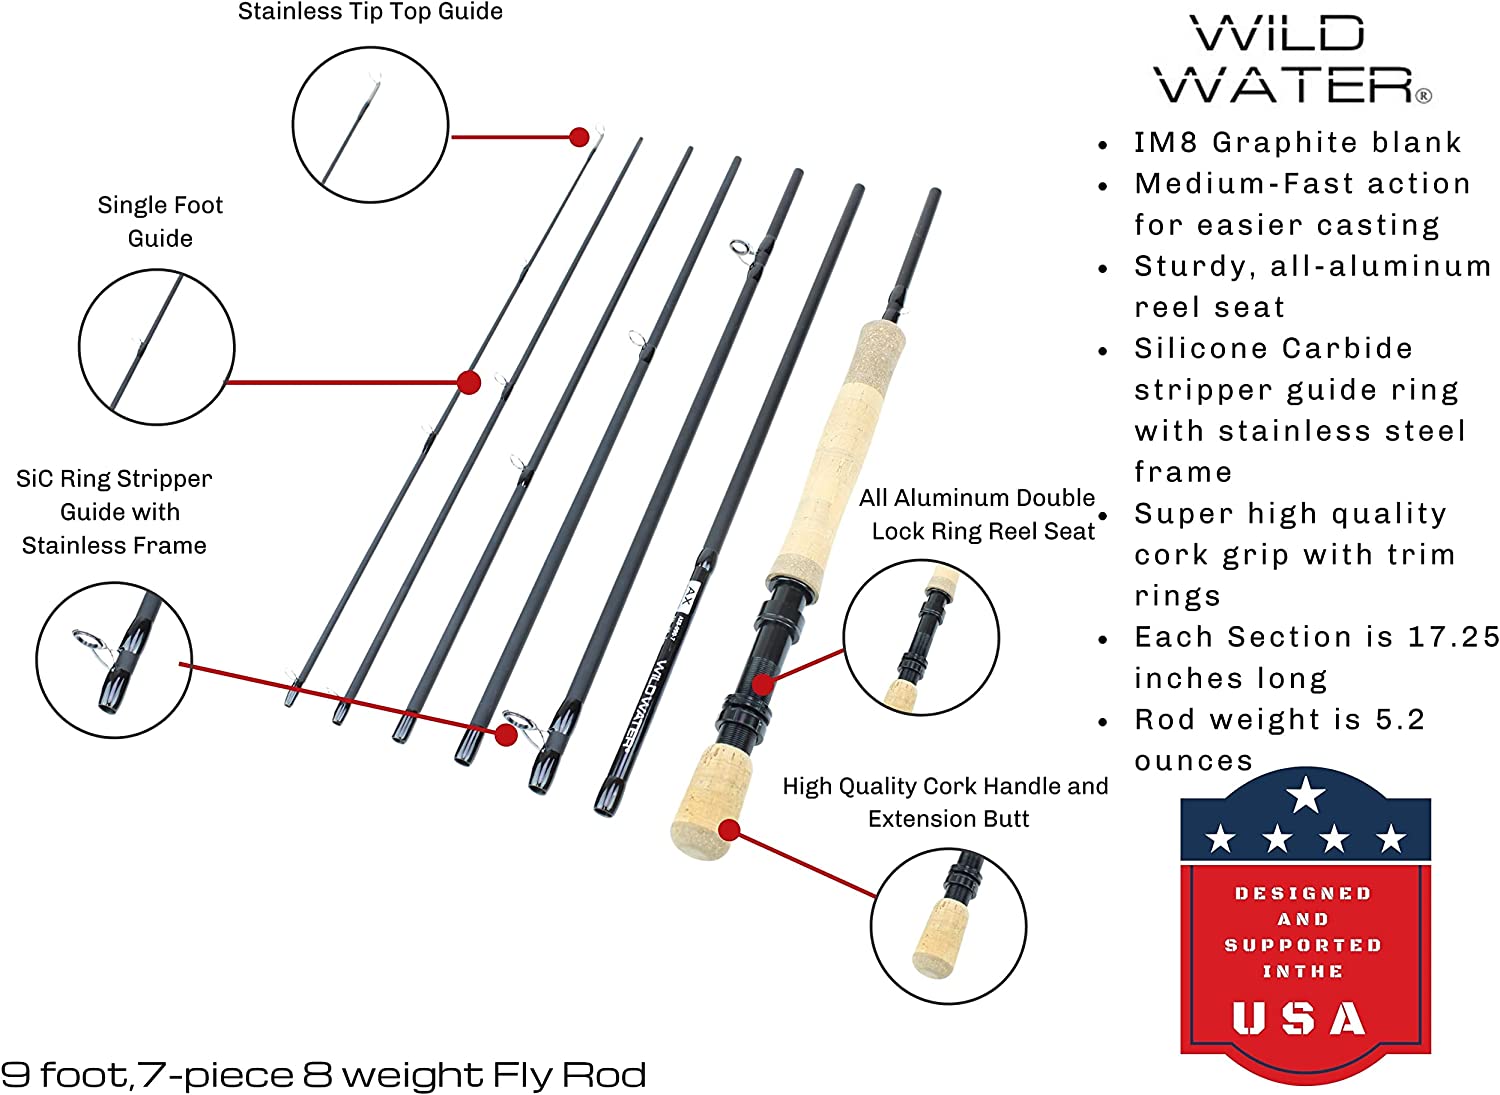 Wild Water Deluxe Saltwater Fly Fishing Kit, 9 ft 8 wt 7 Piece Rod